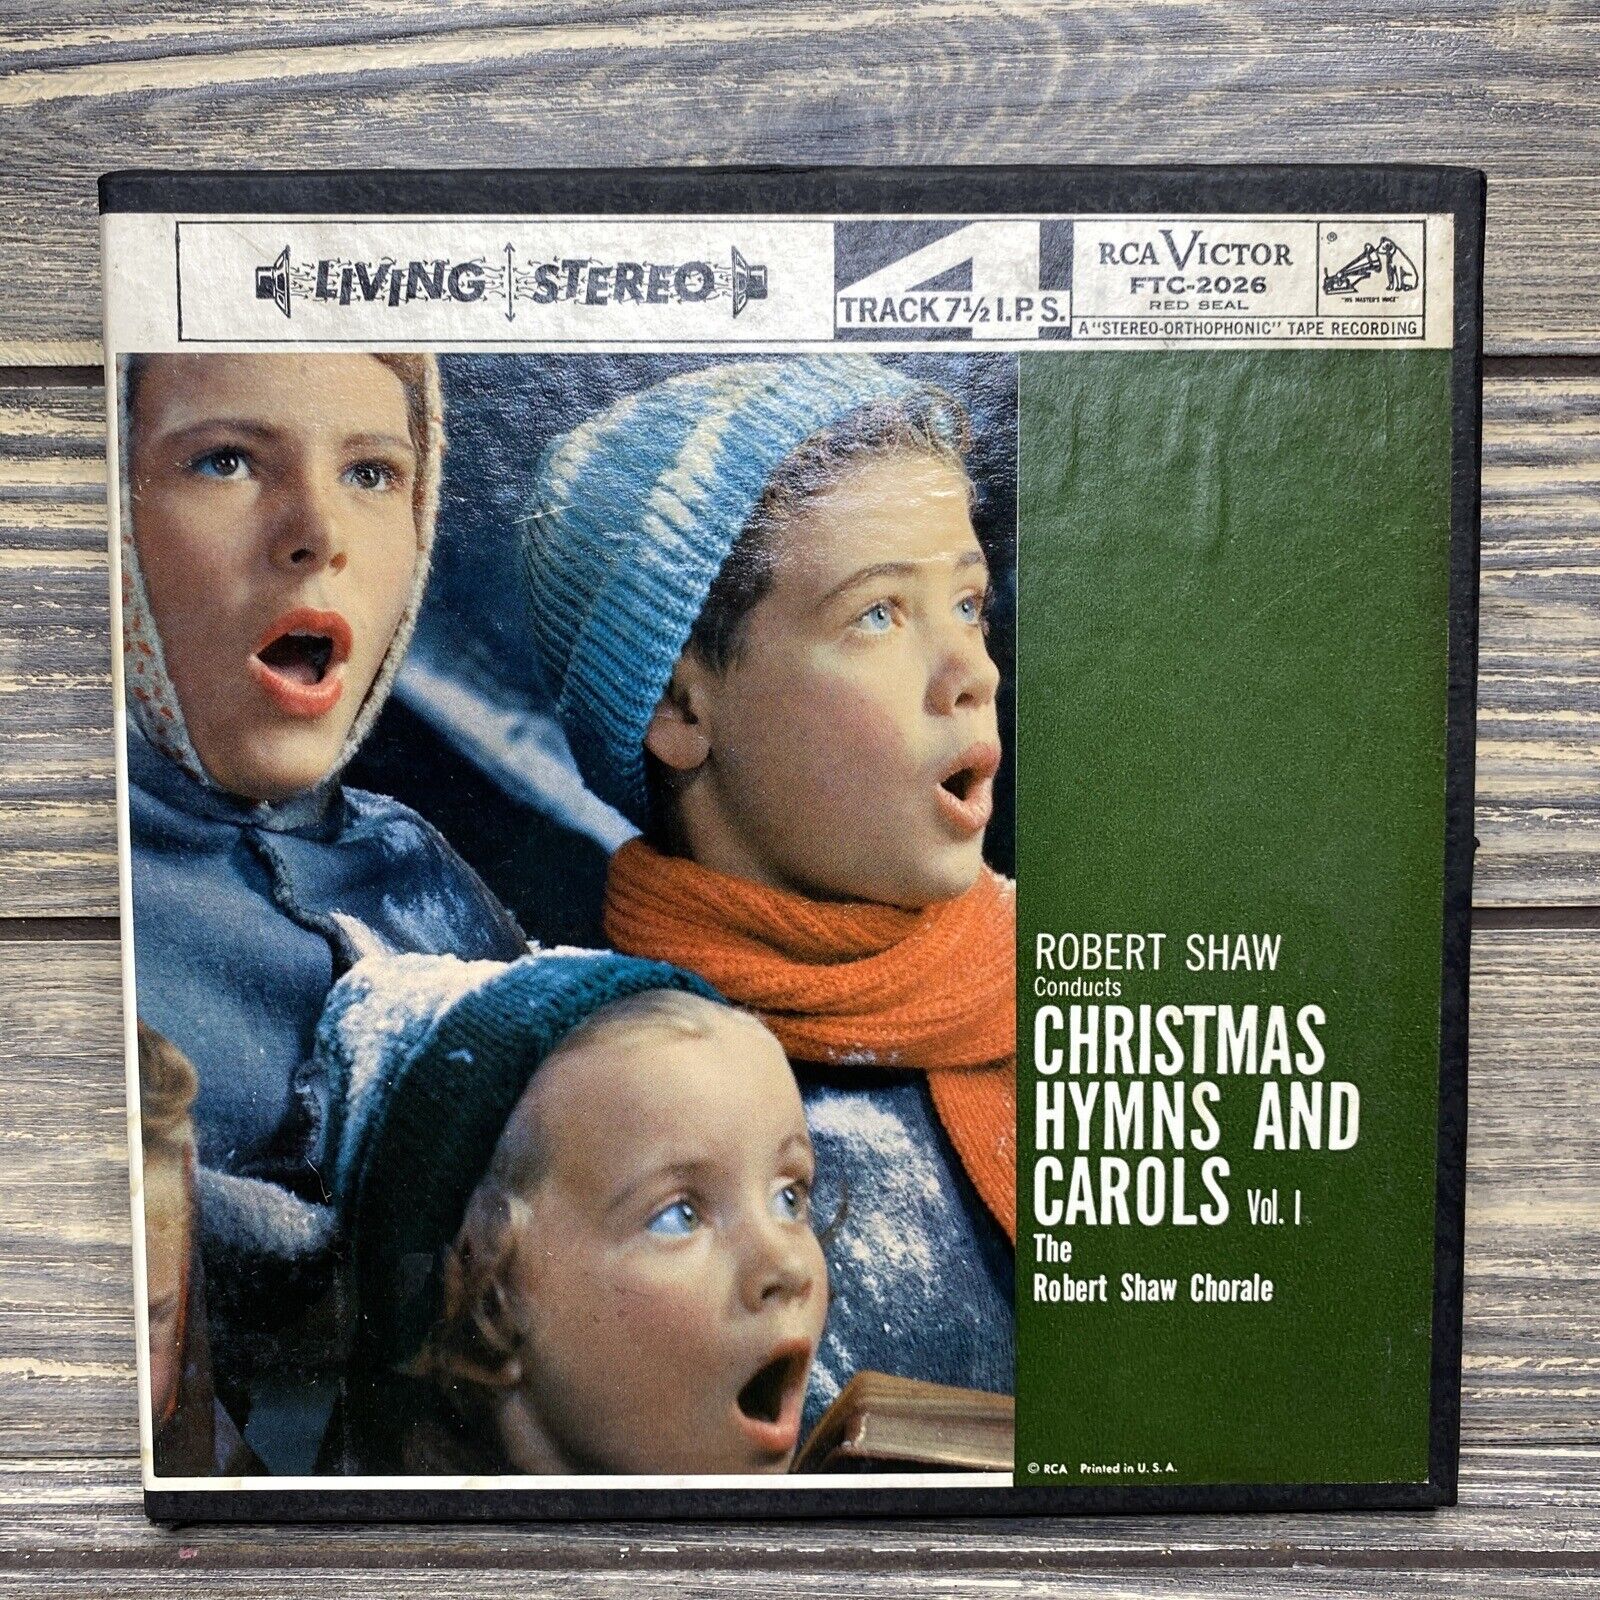 Vtg RCA Victor Christmas Hymns and Carols Robert Shaw Chorale Stereophonic Reel